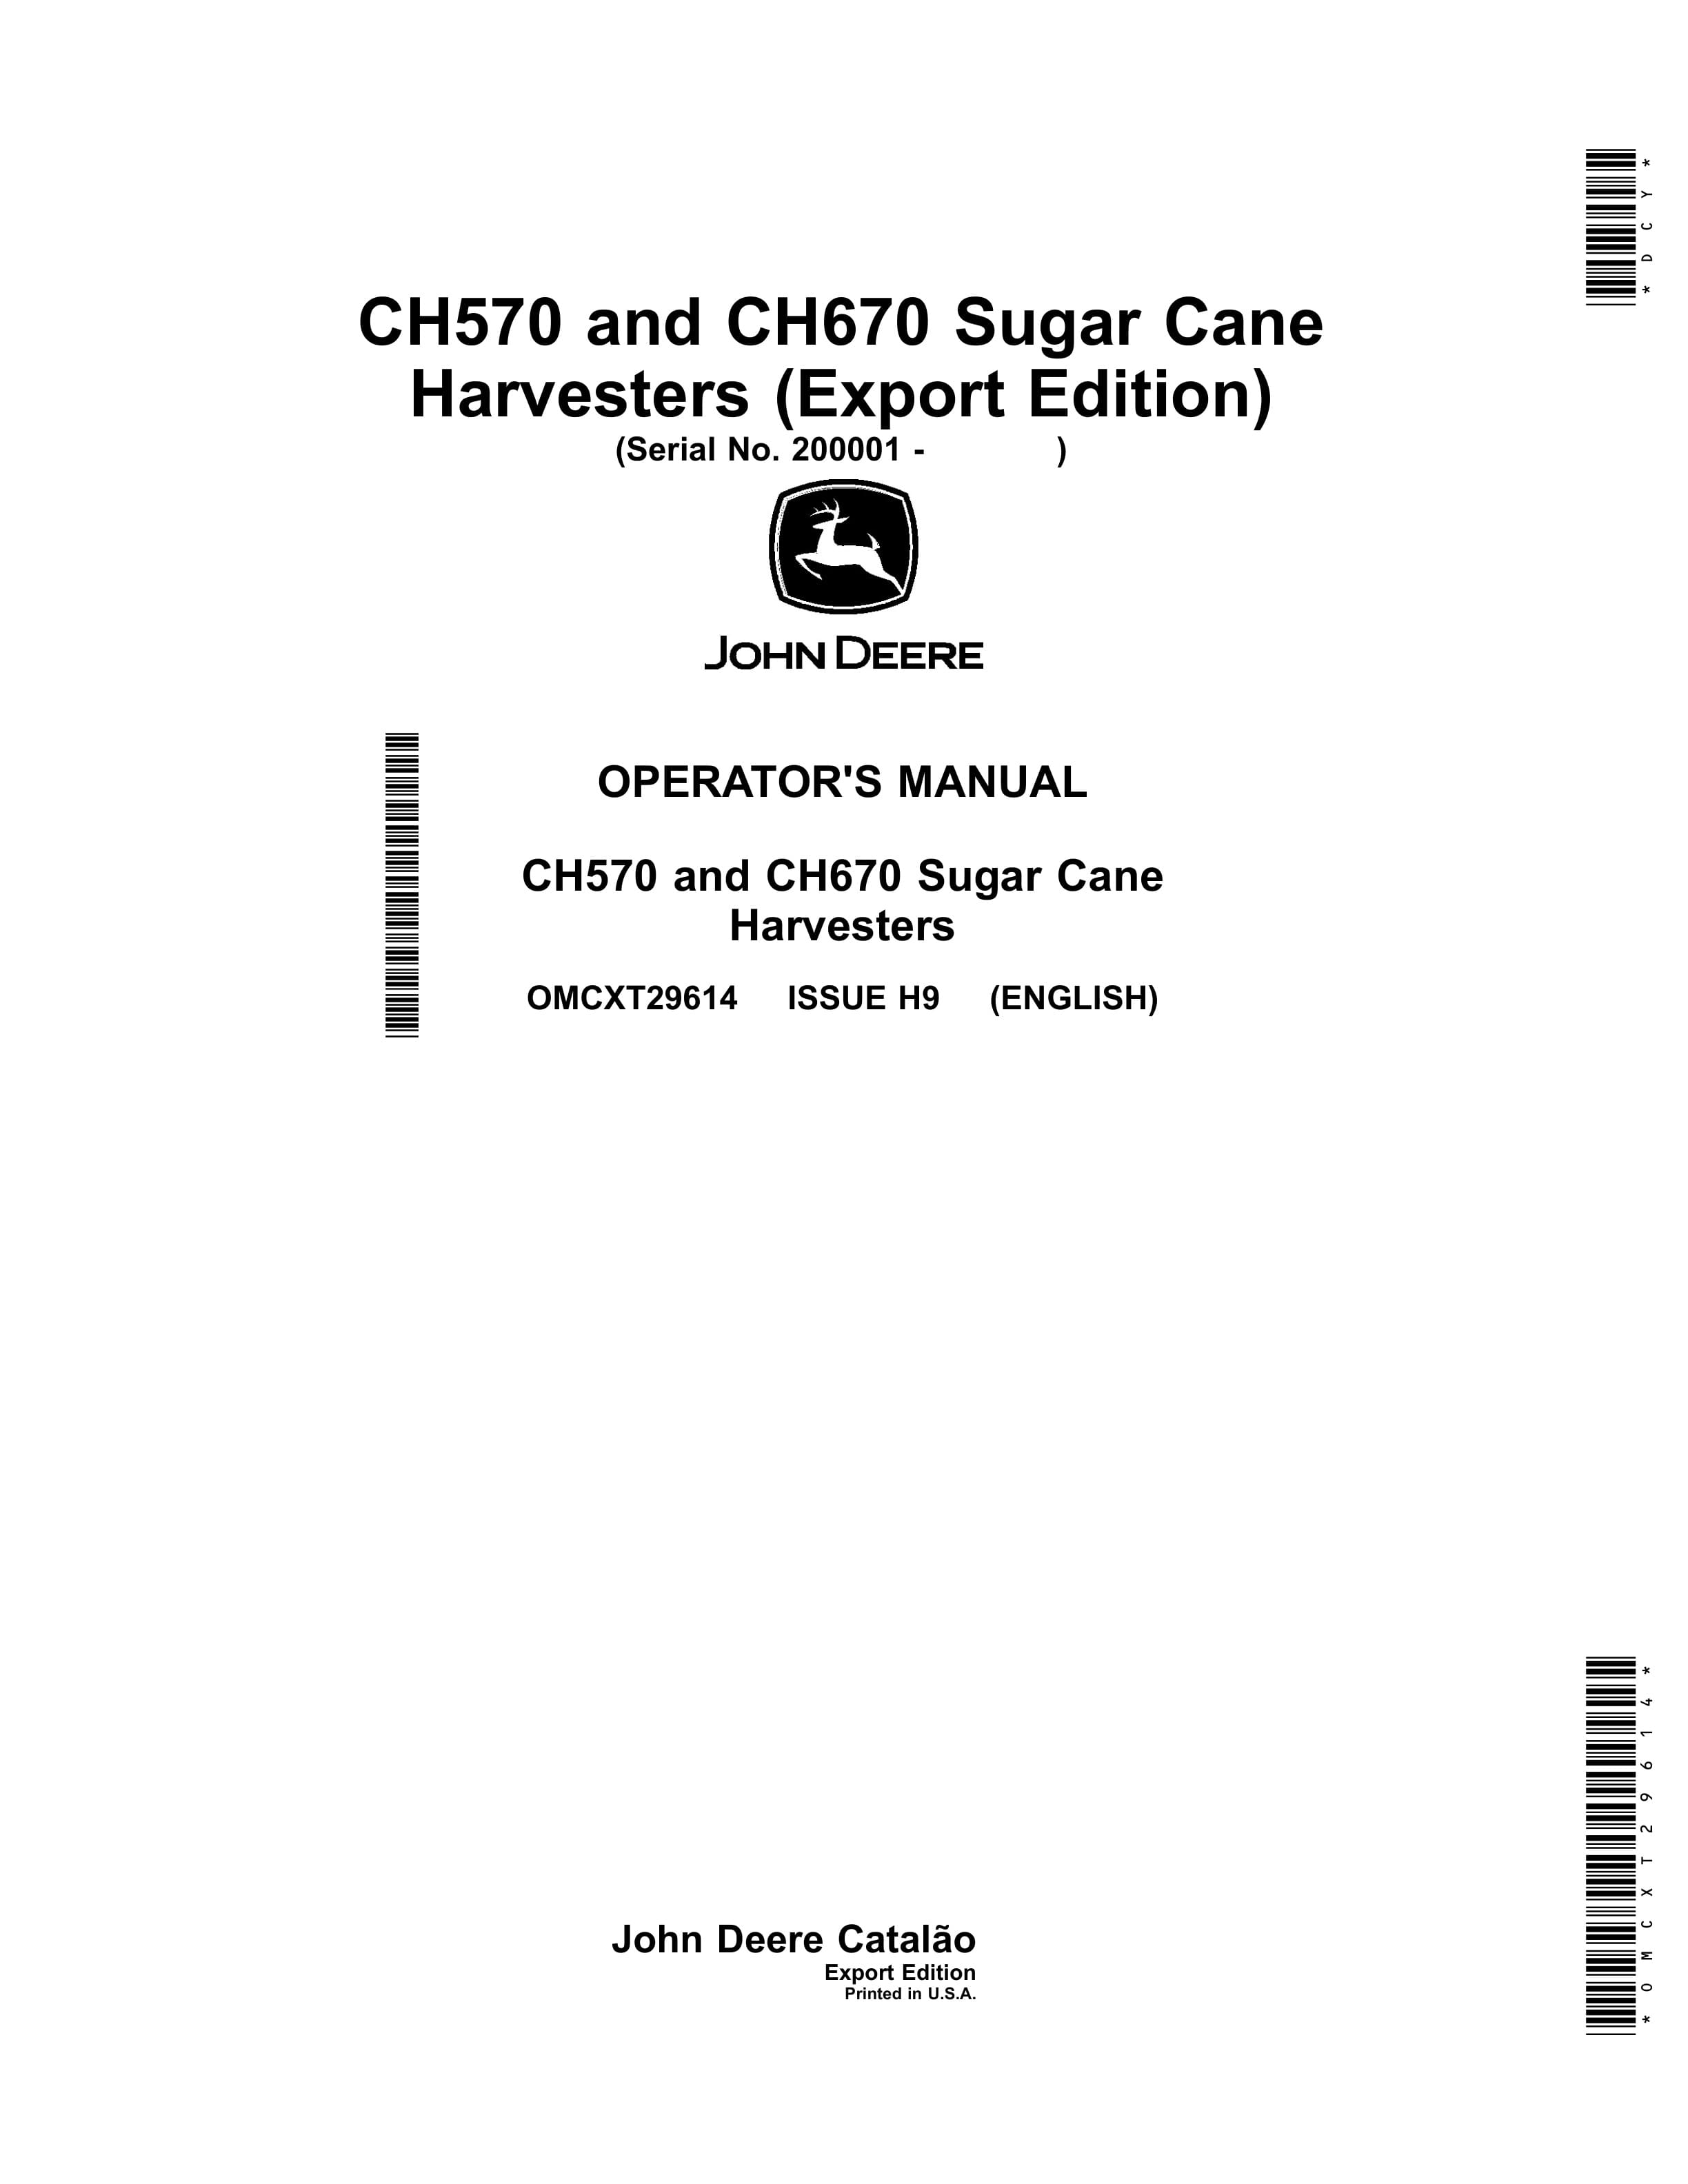 John Deere CH570 and CH670 Sugar Cane Harvesters Operator Manual OMCXT29614 1